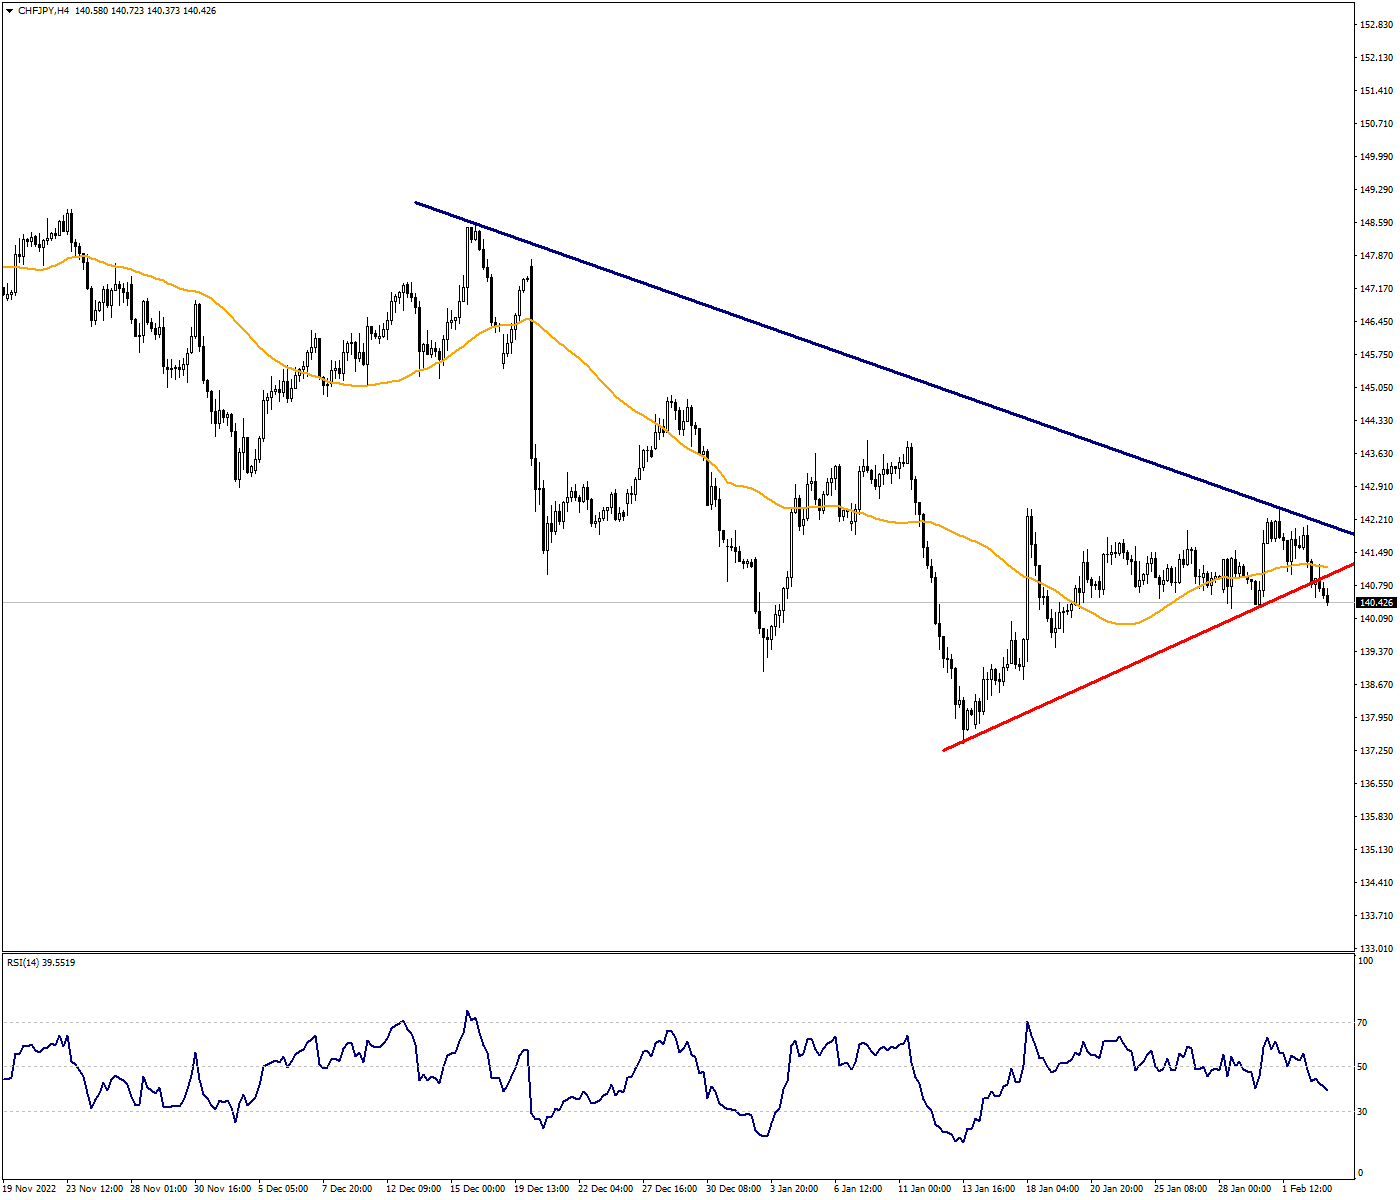 CHFJPY Confirms its Downtrend